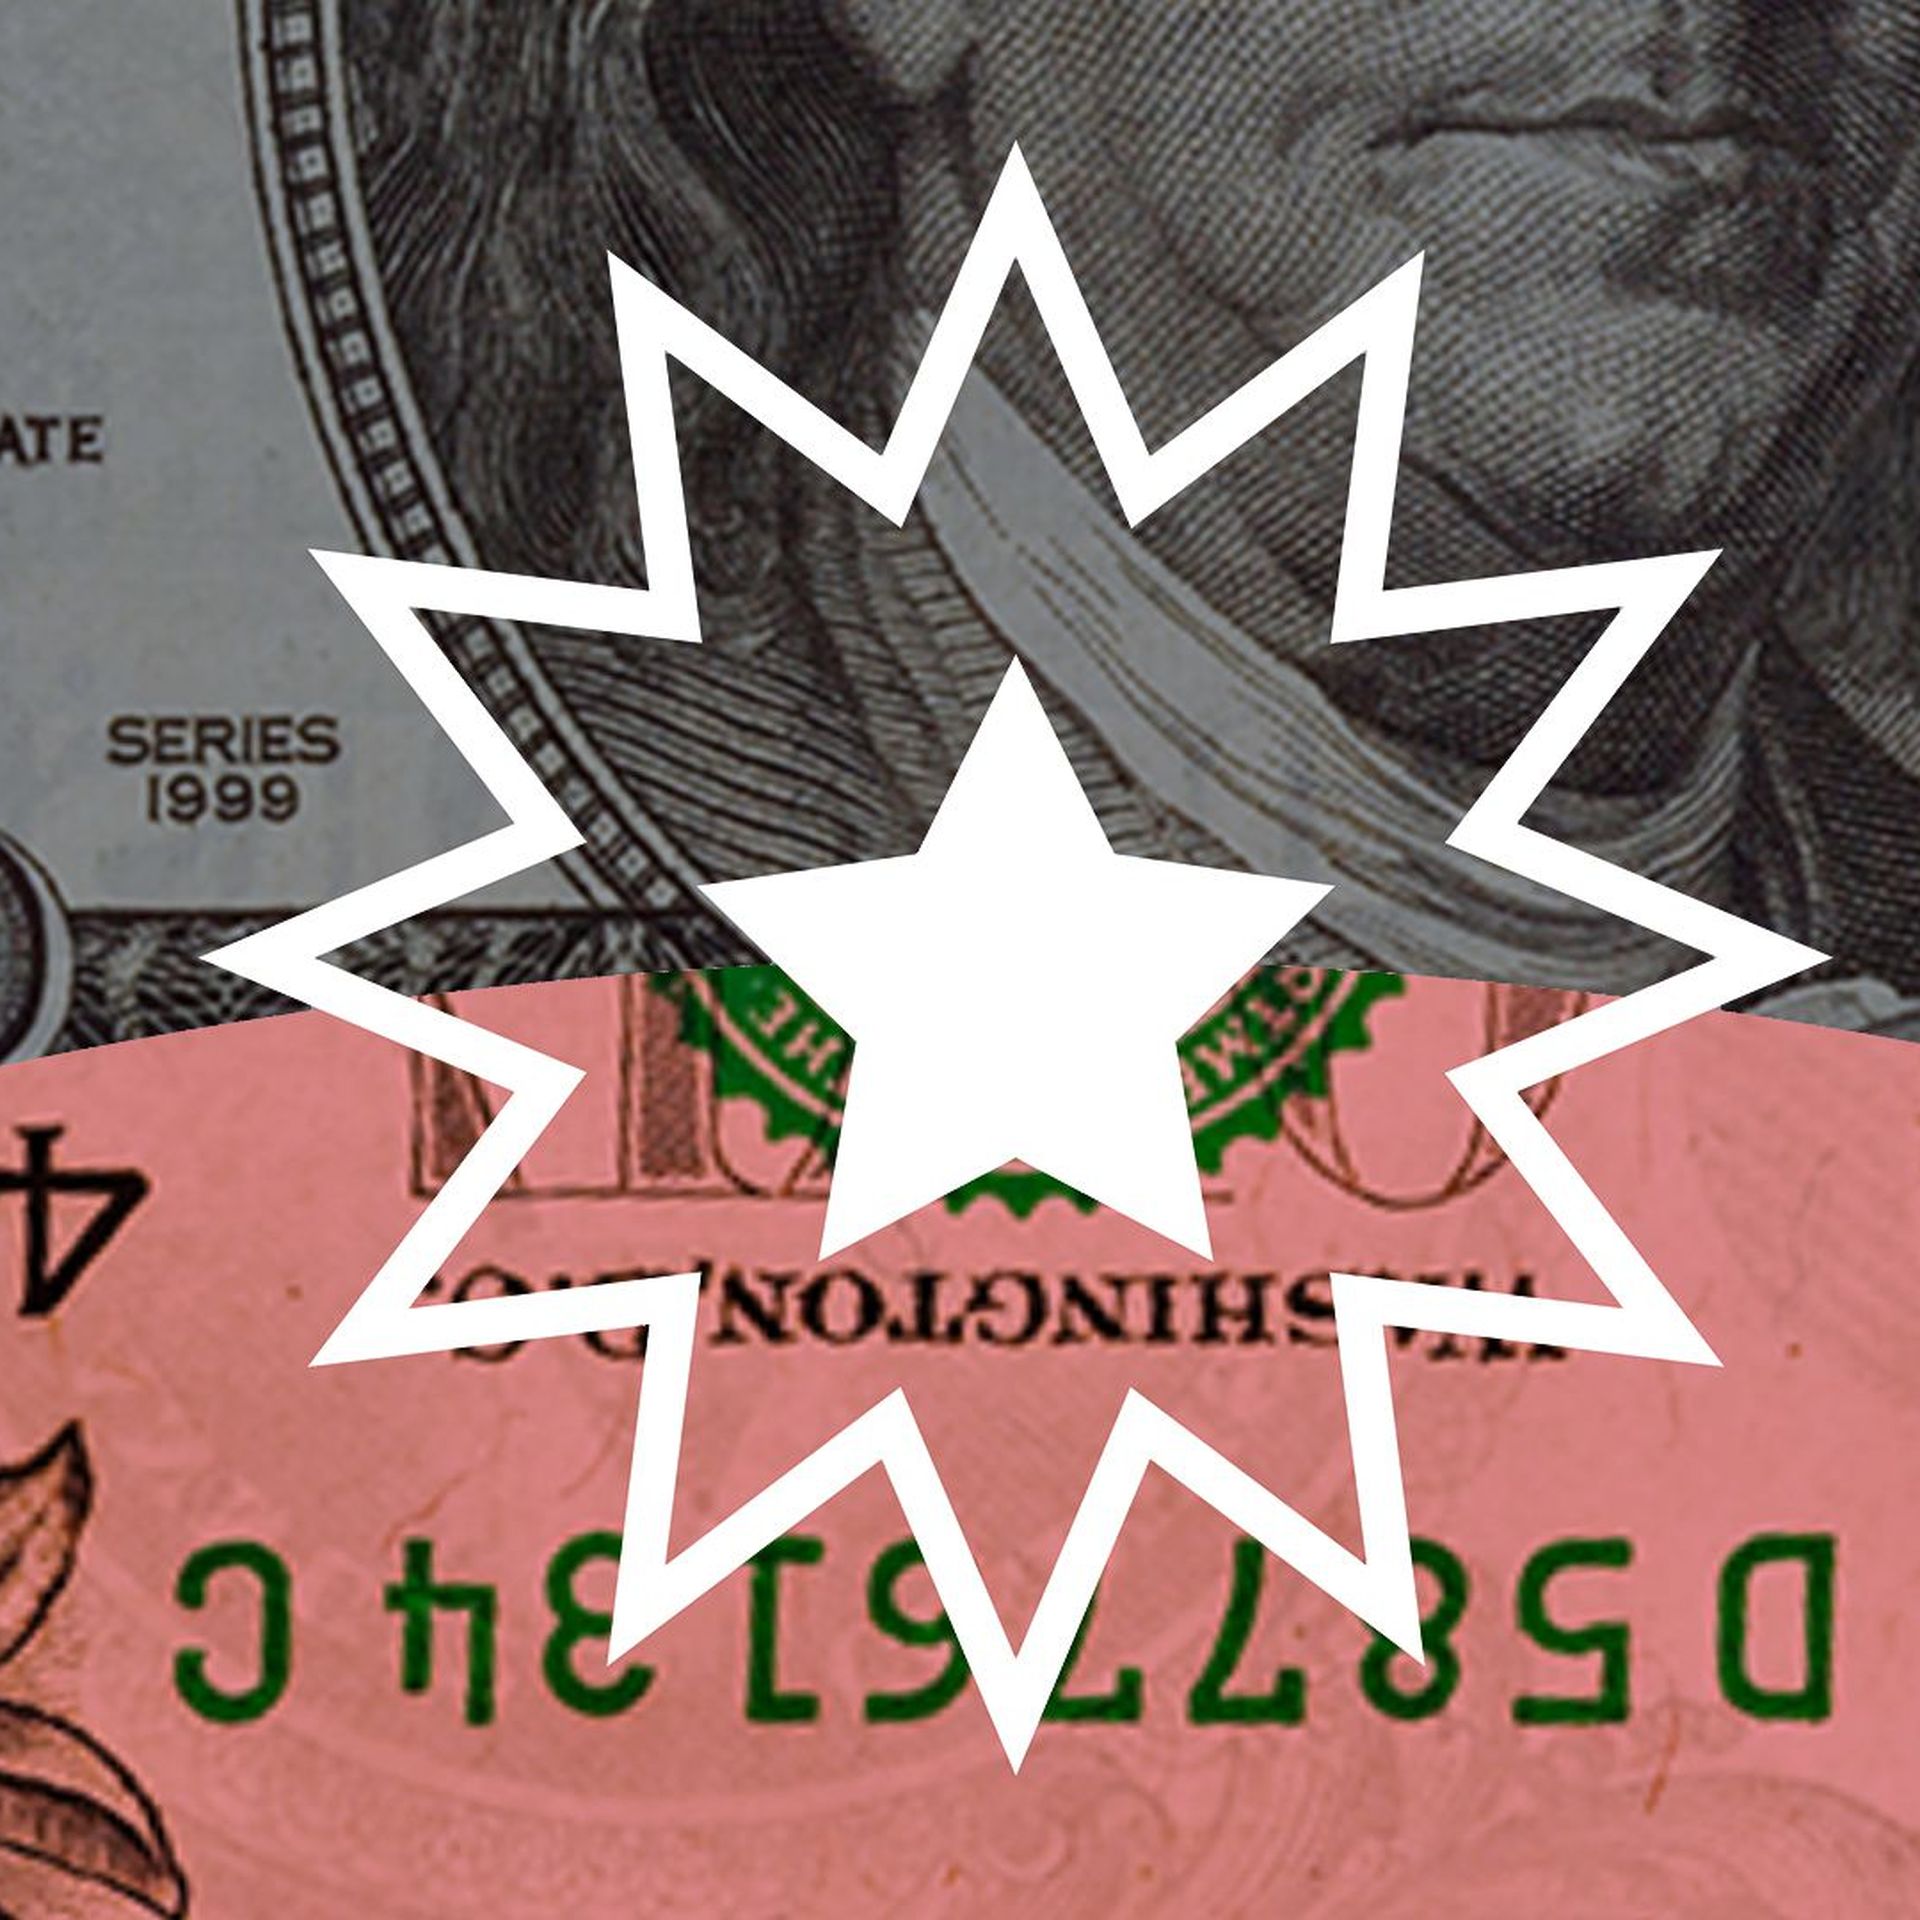 Illustration of the Juneteenth flag made from U.S. money 